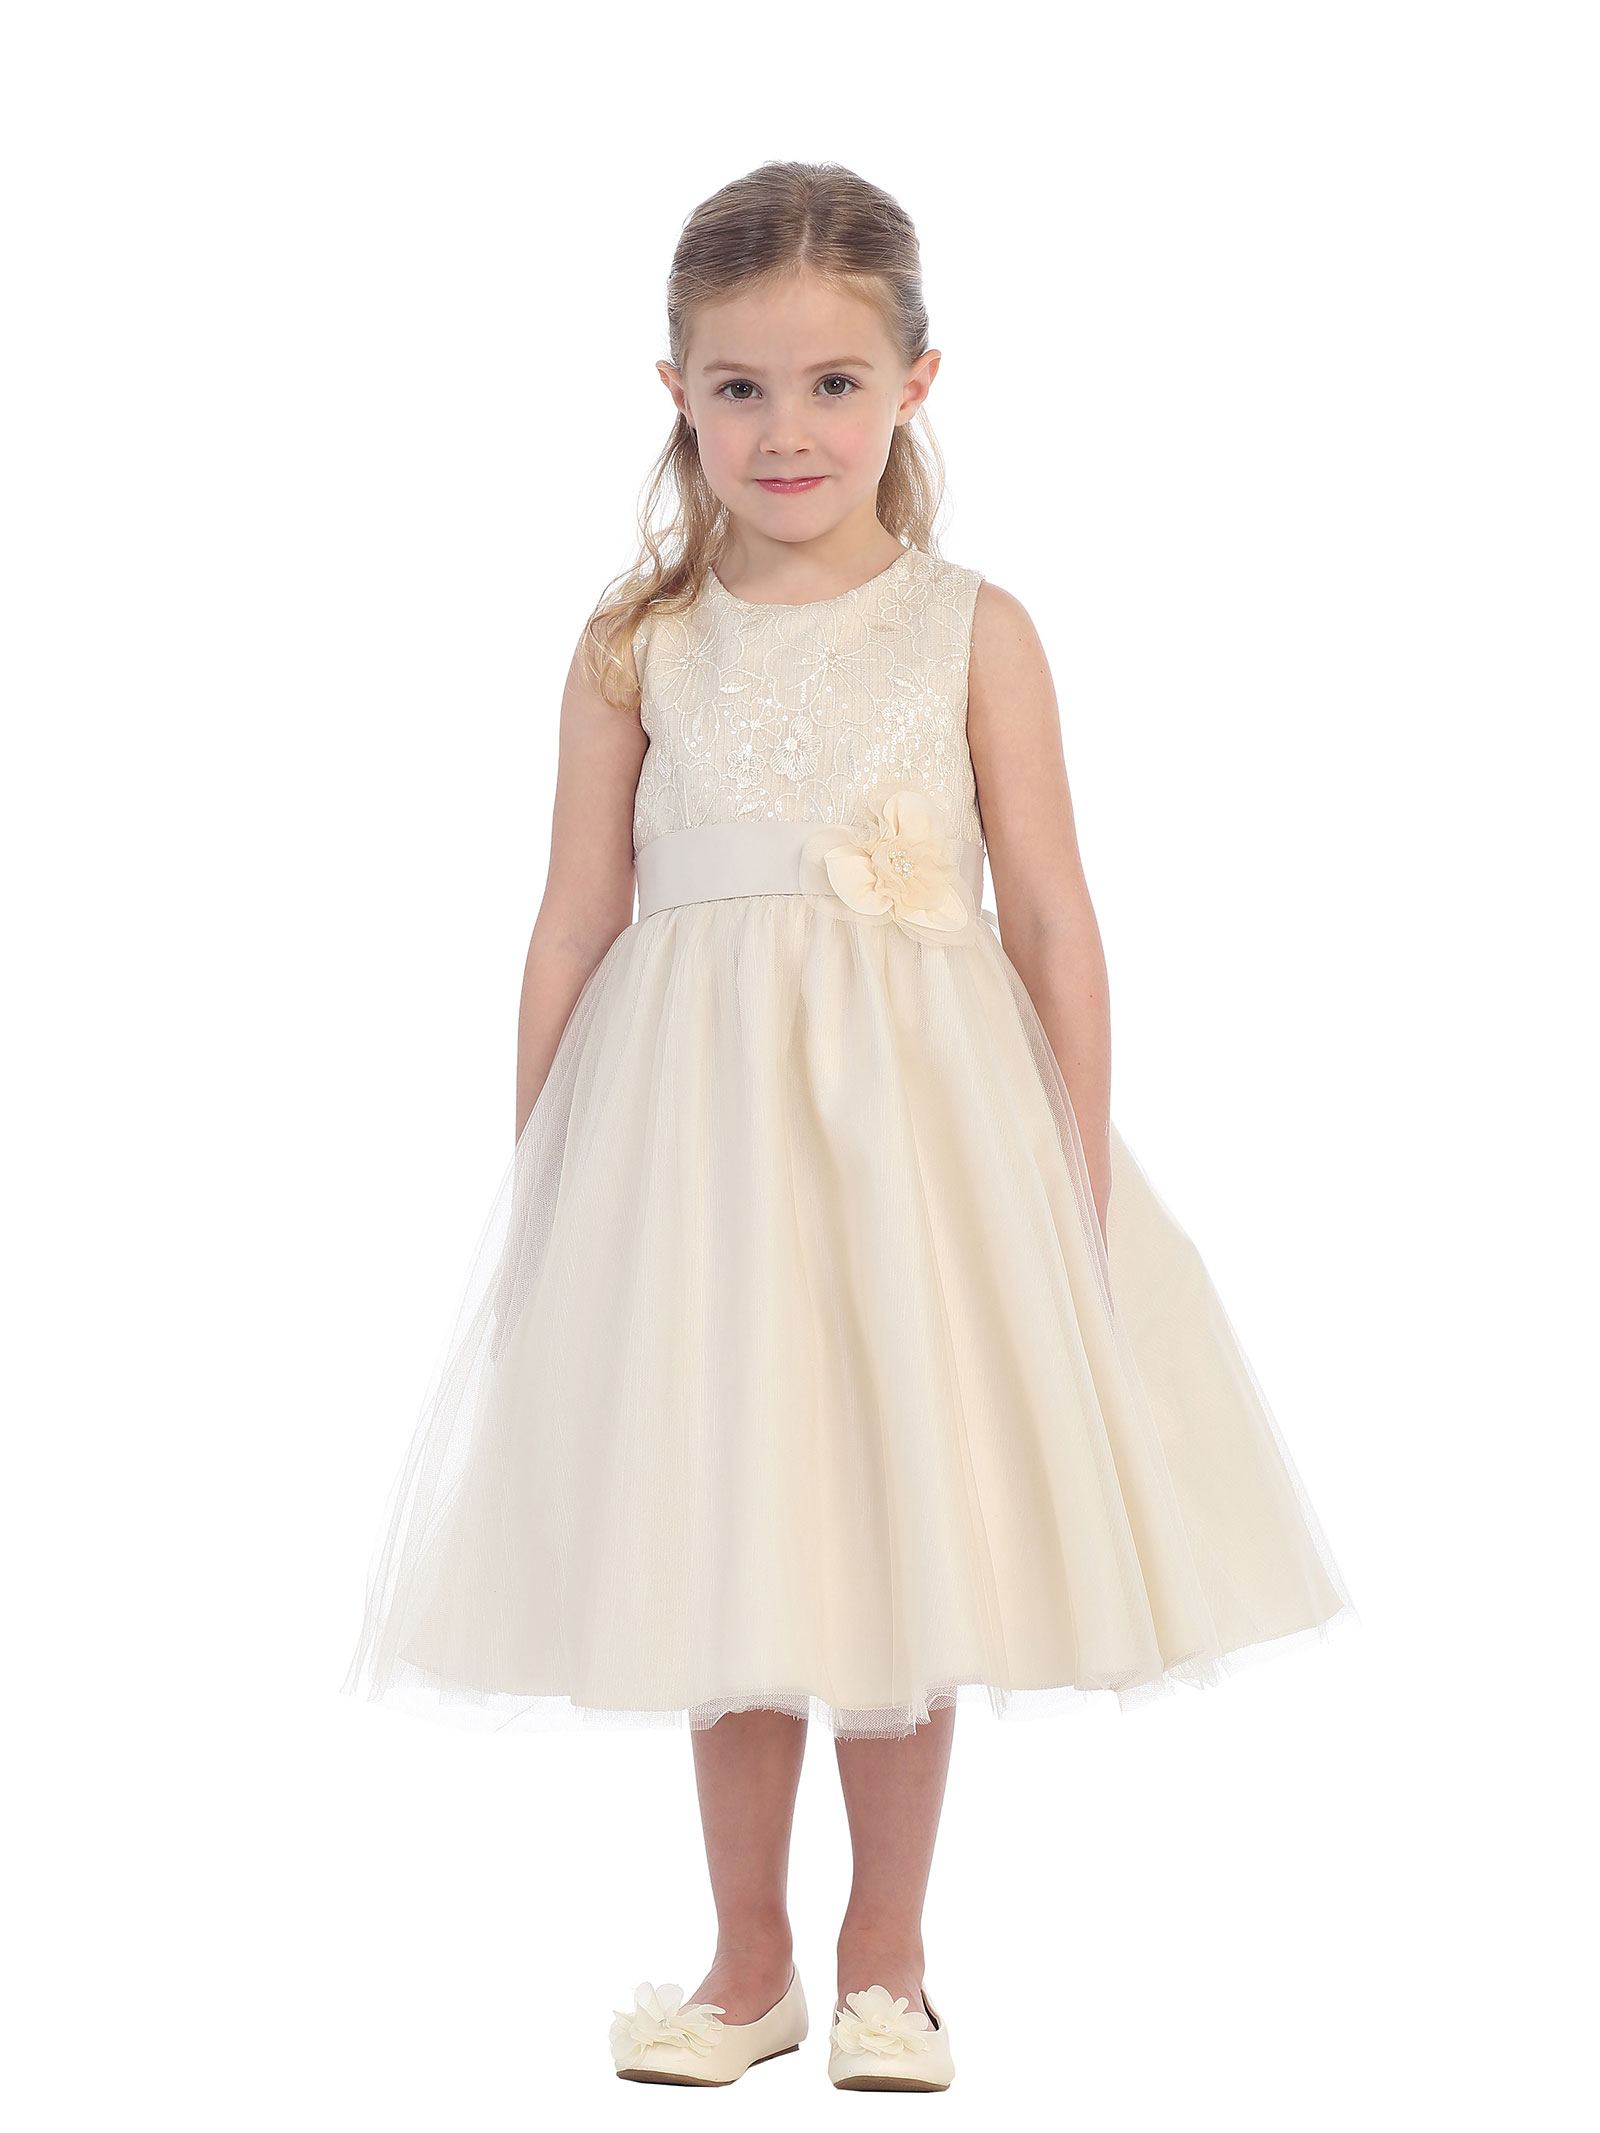 TT_5685CH - Girls Dress Style 5685- Sleeveless Sequin and Lace Dress In ...